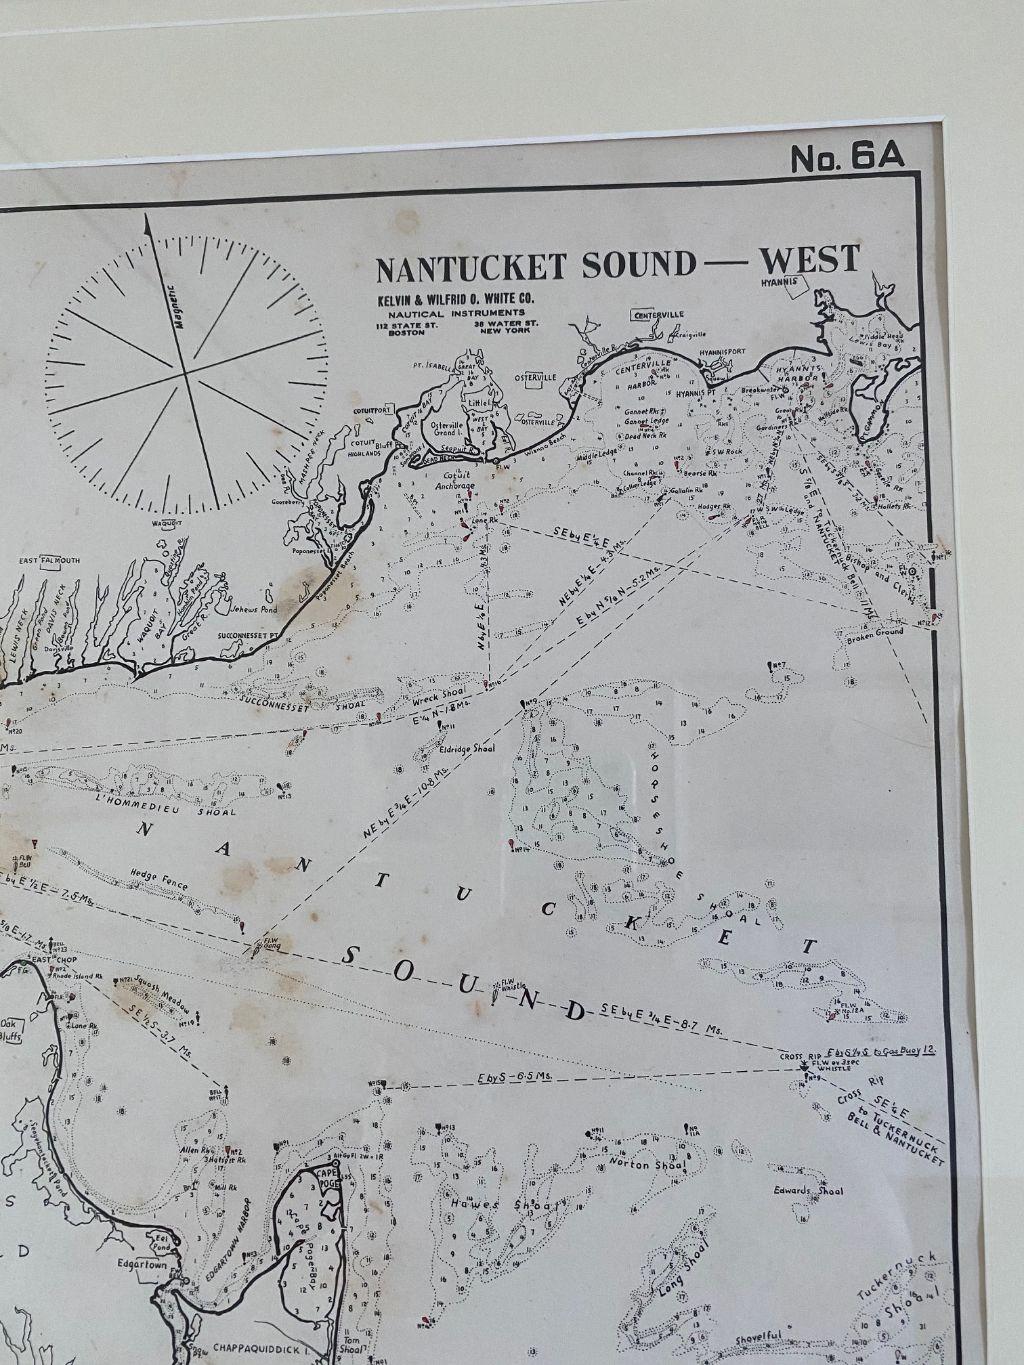 Eldridge chart of Nantucket Sound – West, circa 1920, a scarce navigational chart showing the Eastern approach into Nantucket Sound. This chart was made expressly for Eldridge's son-in-law Wilfrid White of the famous Kelvin & White Ship Chandlers in